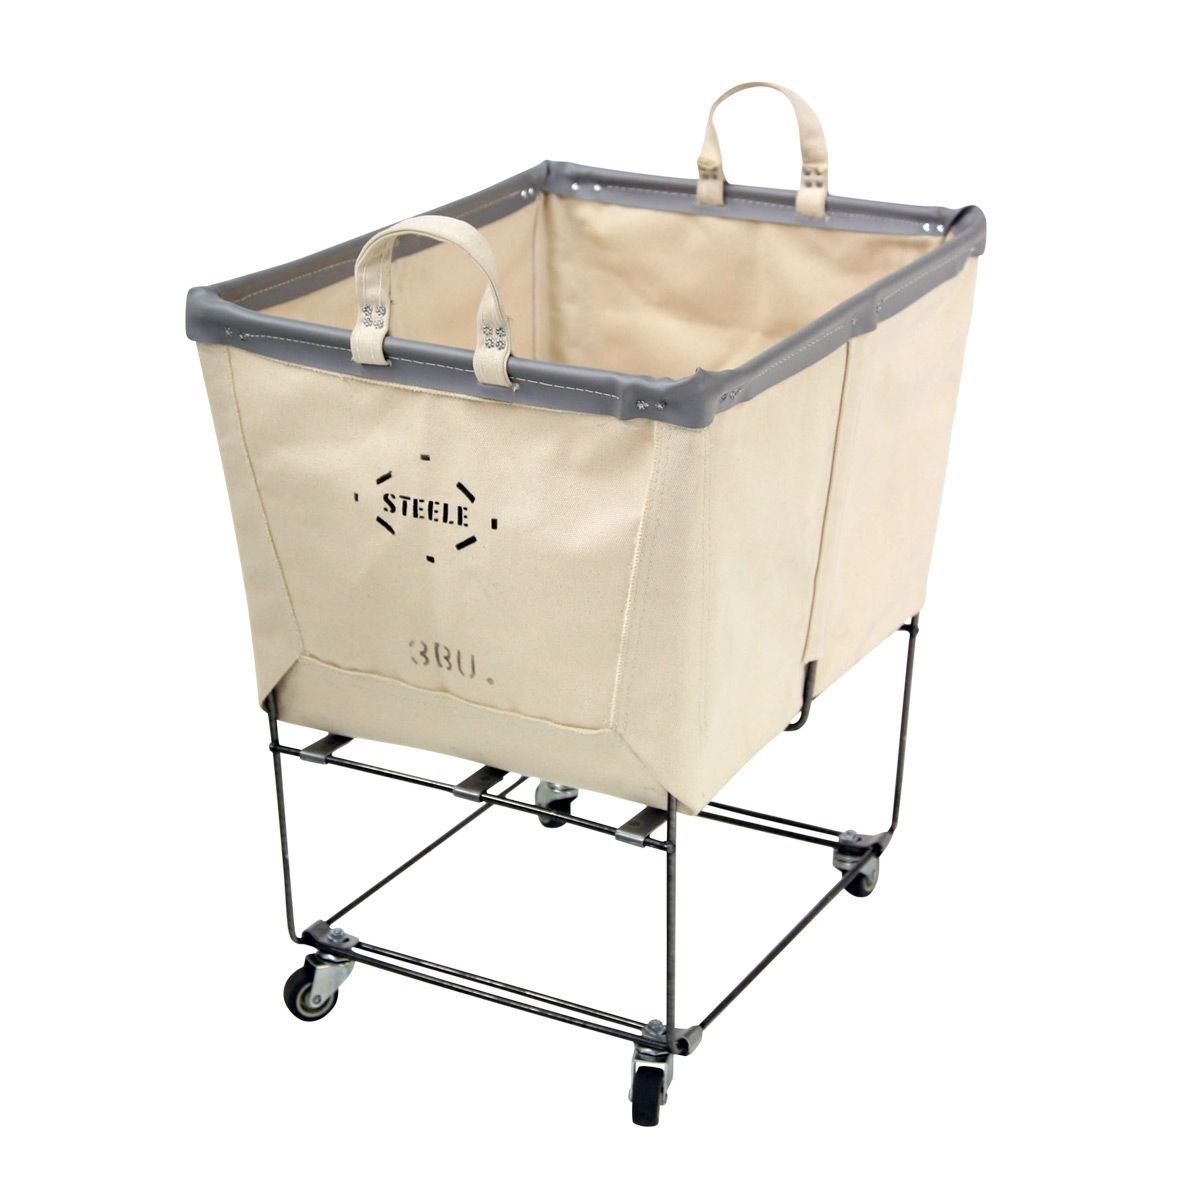 Steele Canvas Laundry Cart | The Container Store